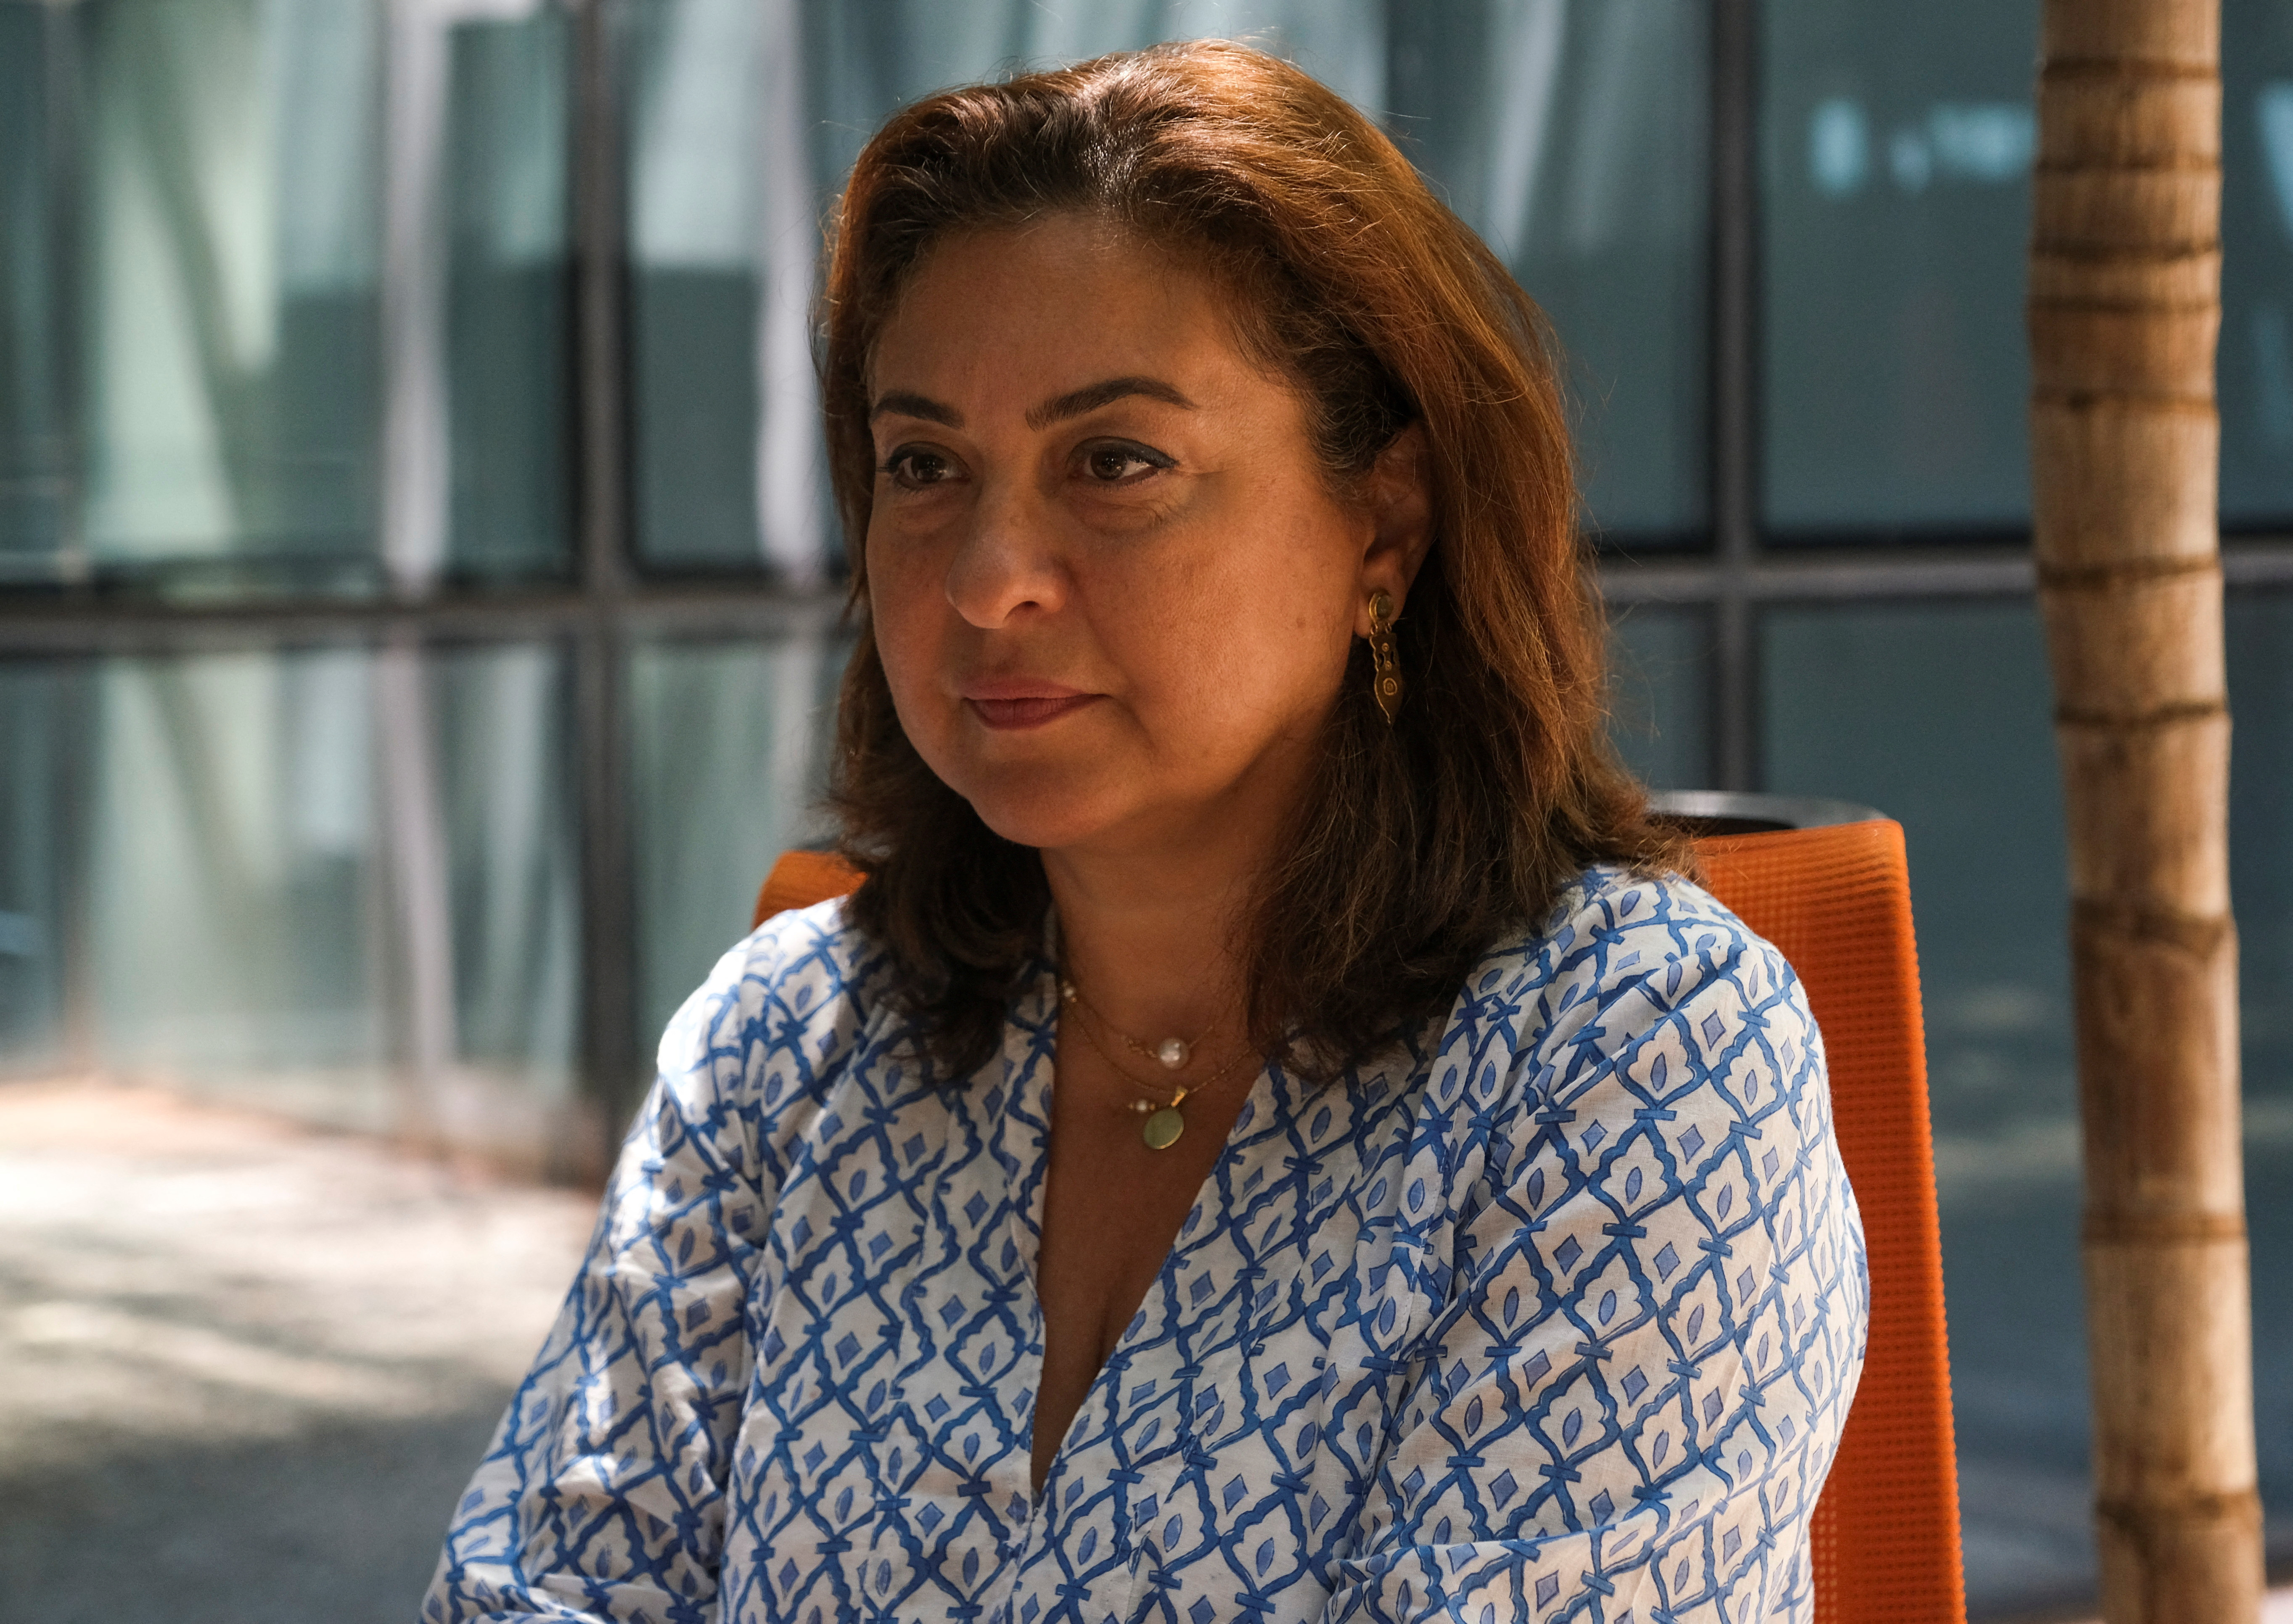 Lamia Moubayed, head of Lebanese Institute of Finance Basil Fuleihan, attends an interview with Reuters in Beirut